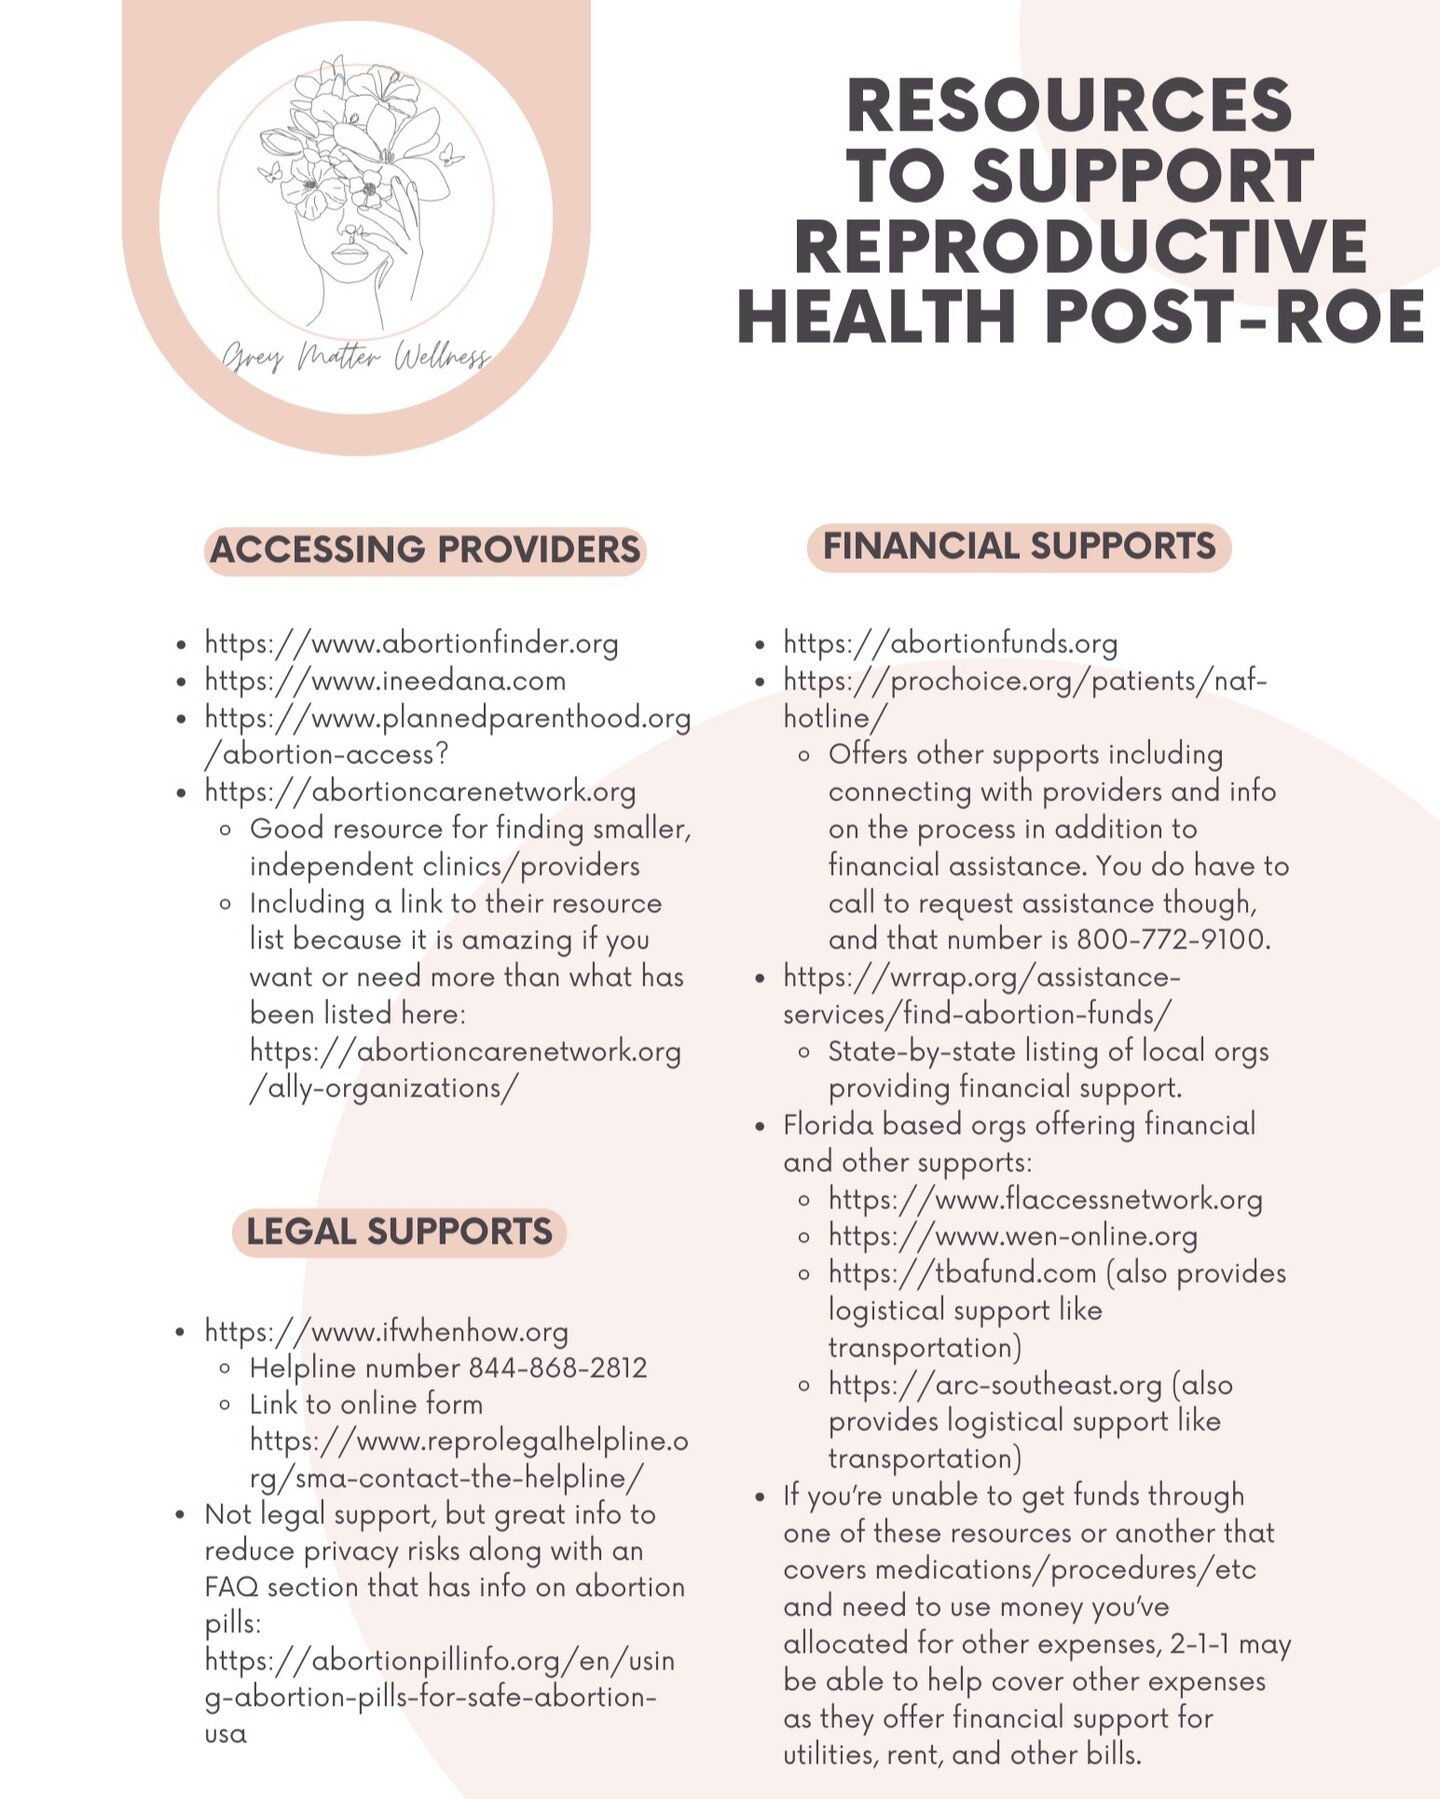 Post-Roe reproductive health concerns are understandably creating a great deal of anxiety for many people. Anxiety hates action, and these resources may be able to help you make a plan for yourself that you feel both empowered and comforted by.

Scre